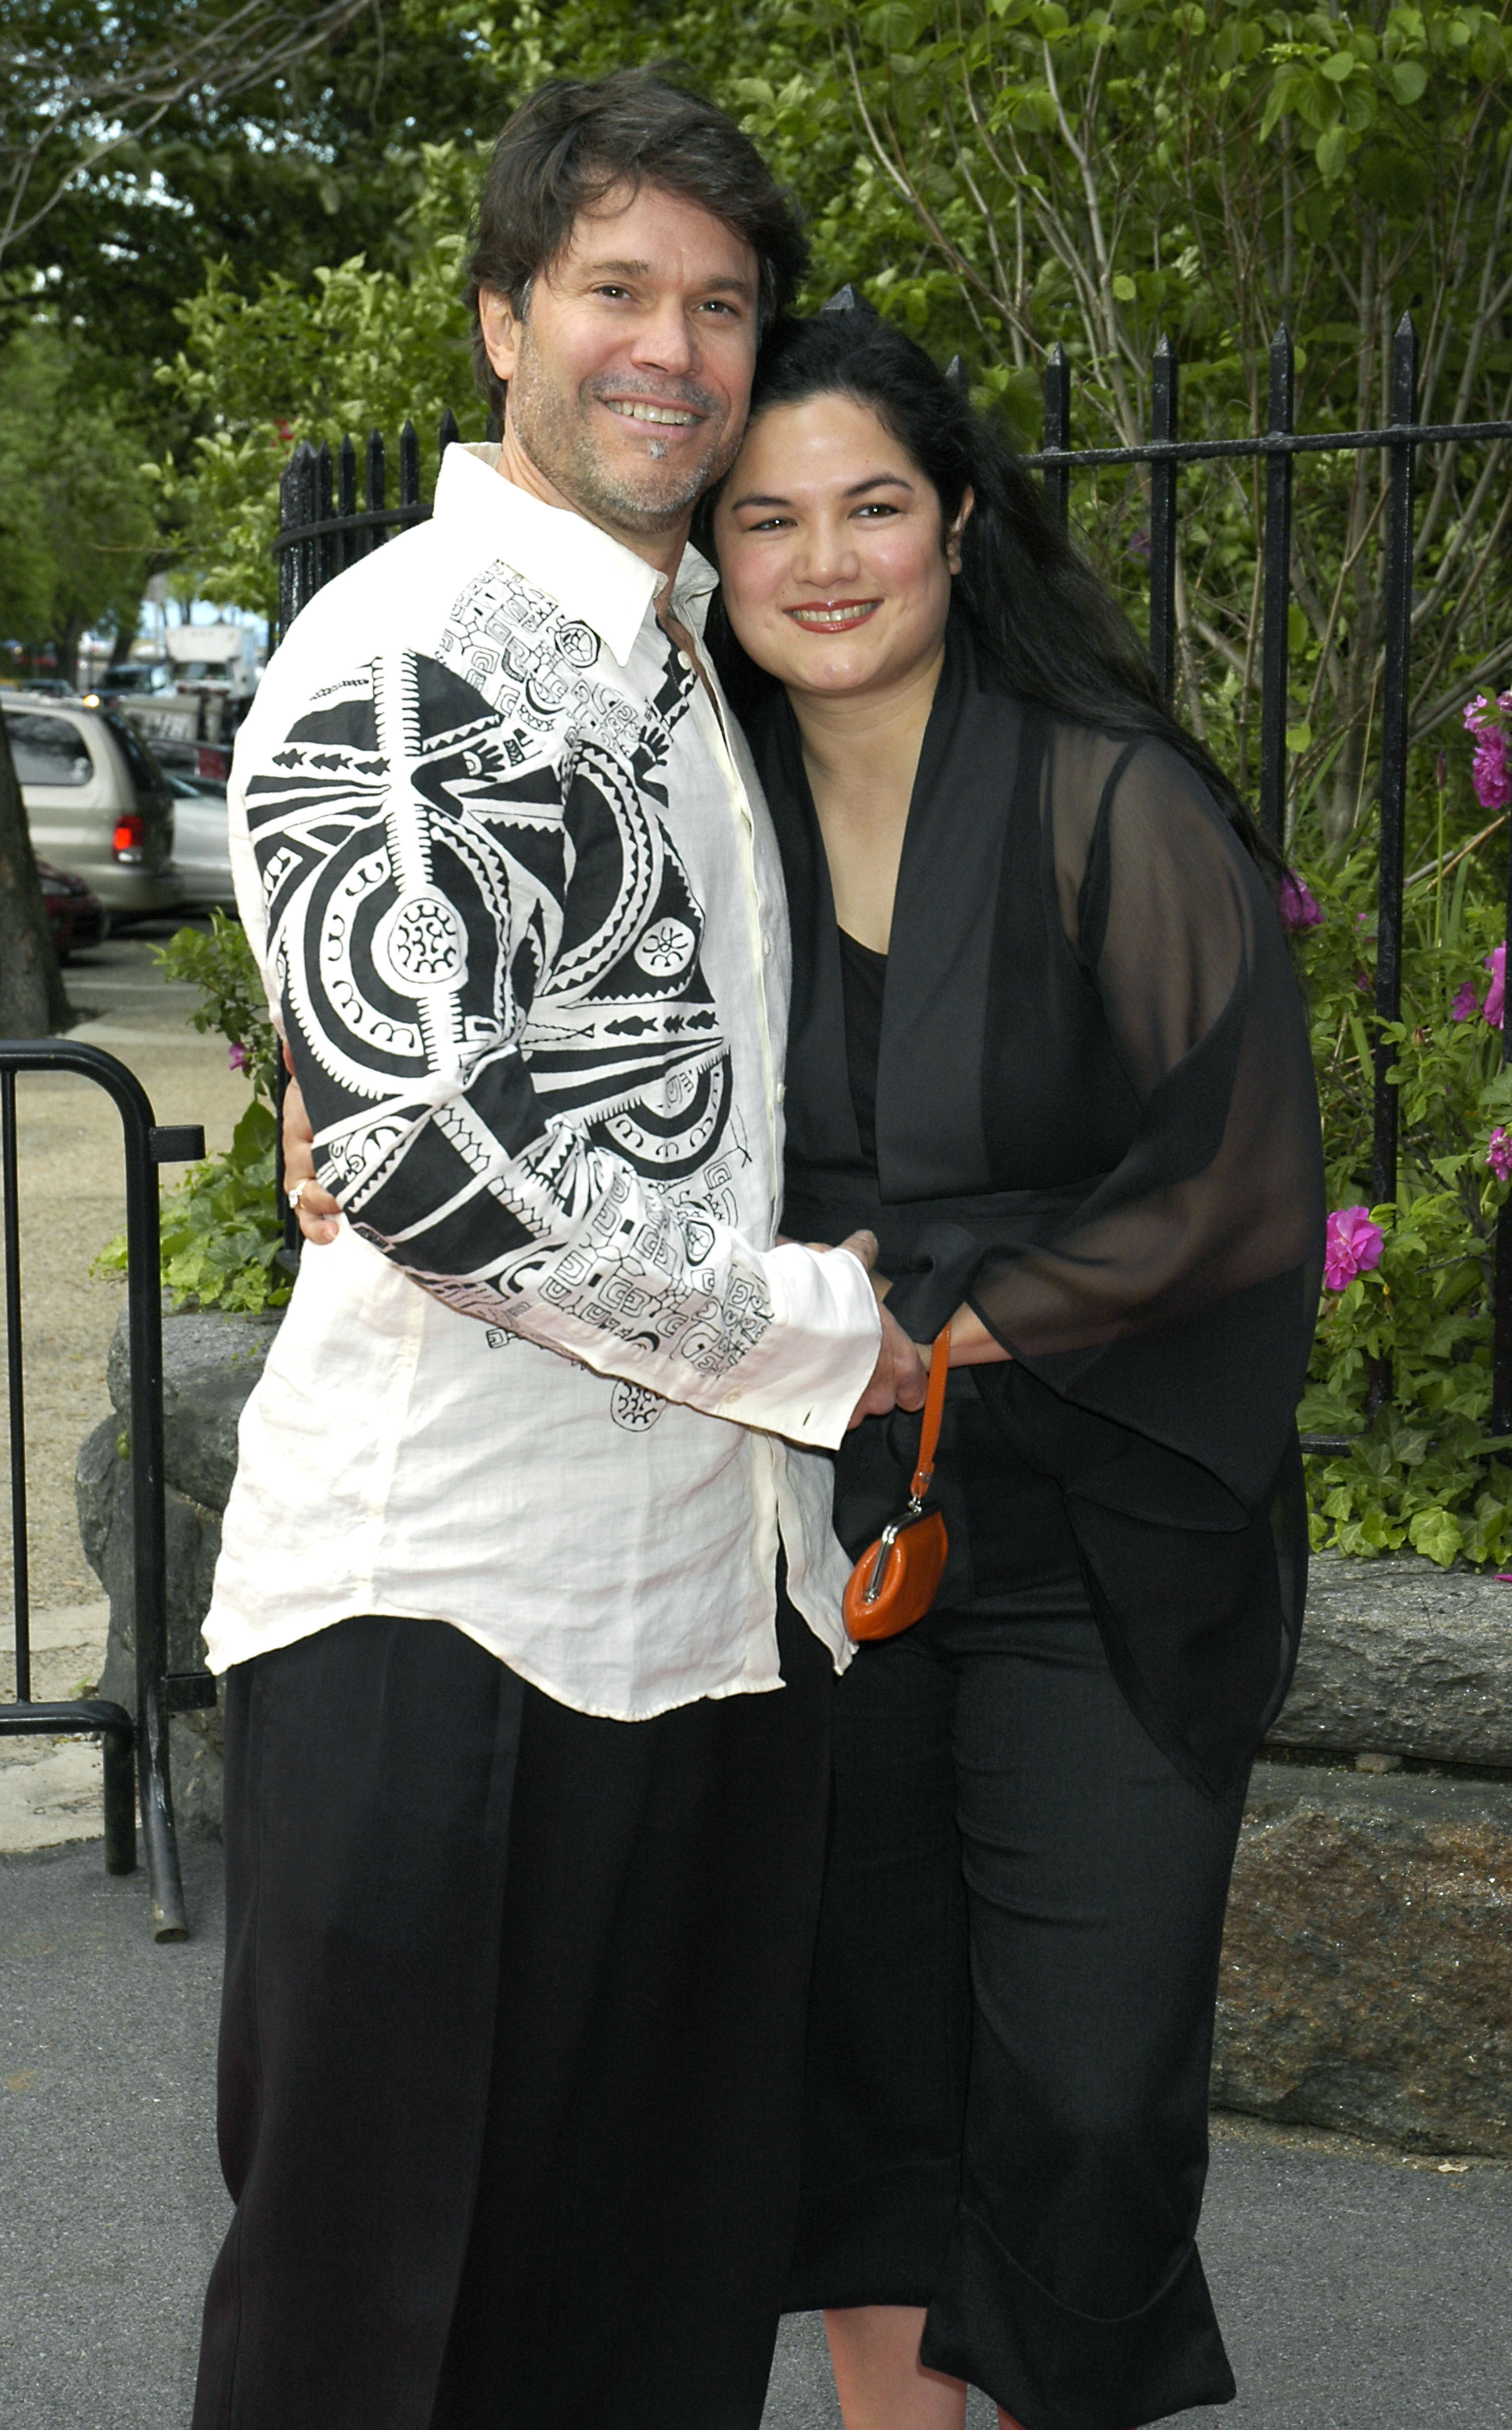 Peter Reckell and wife Kelly Moneymaker during 31st Annual Daytime Emmys - New York City Mayor Bloomberg's Reception at Gracie Mansion in New York City, New York, United States on May 20, 2004. | Source: Getty Images